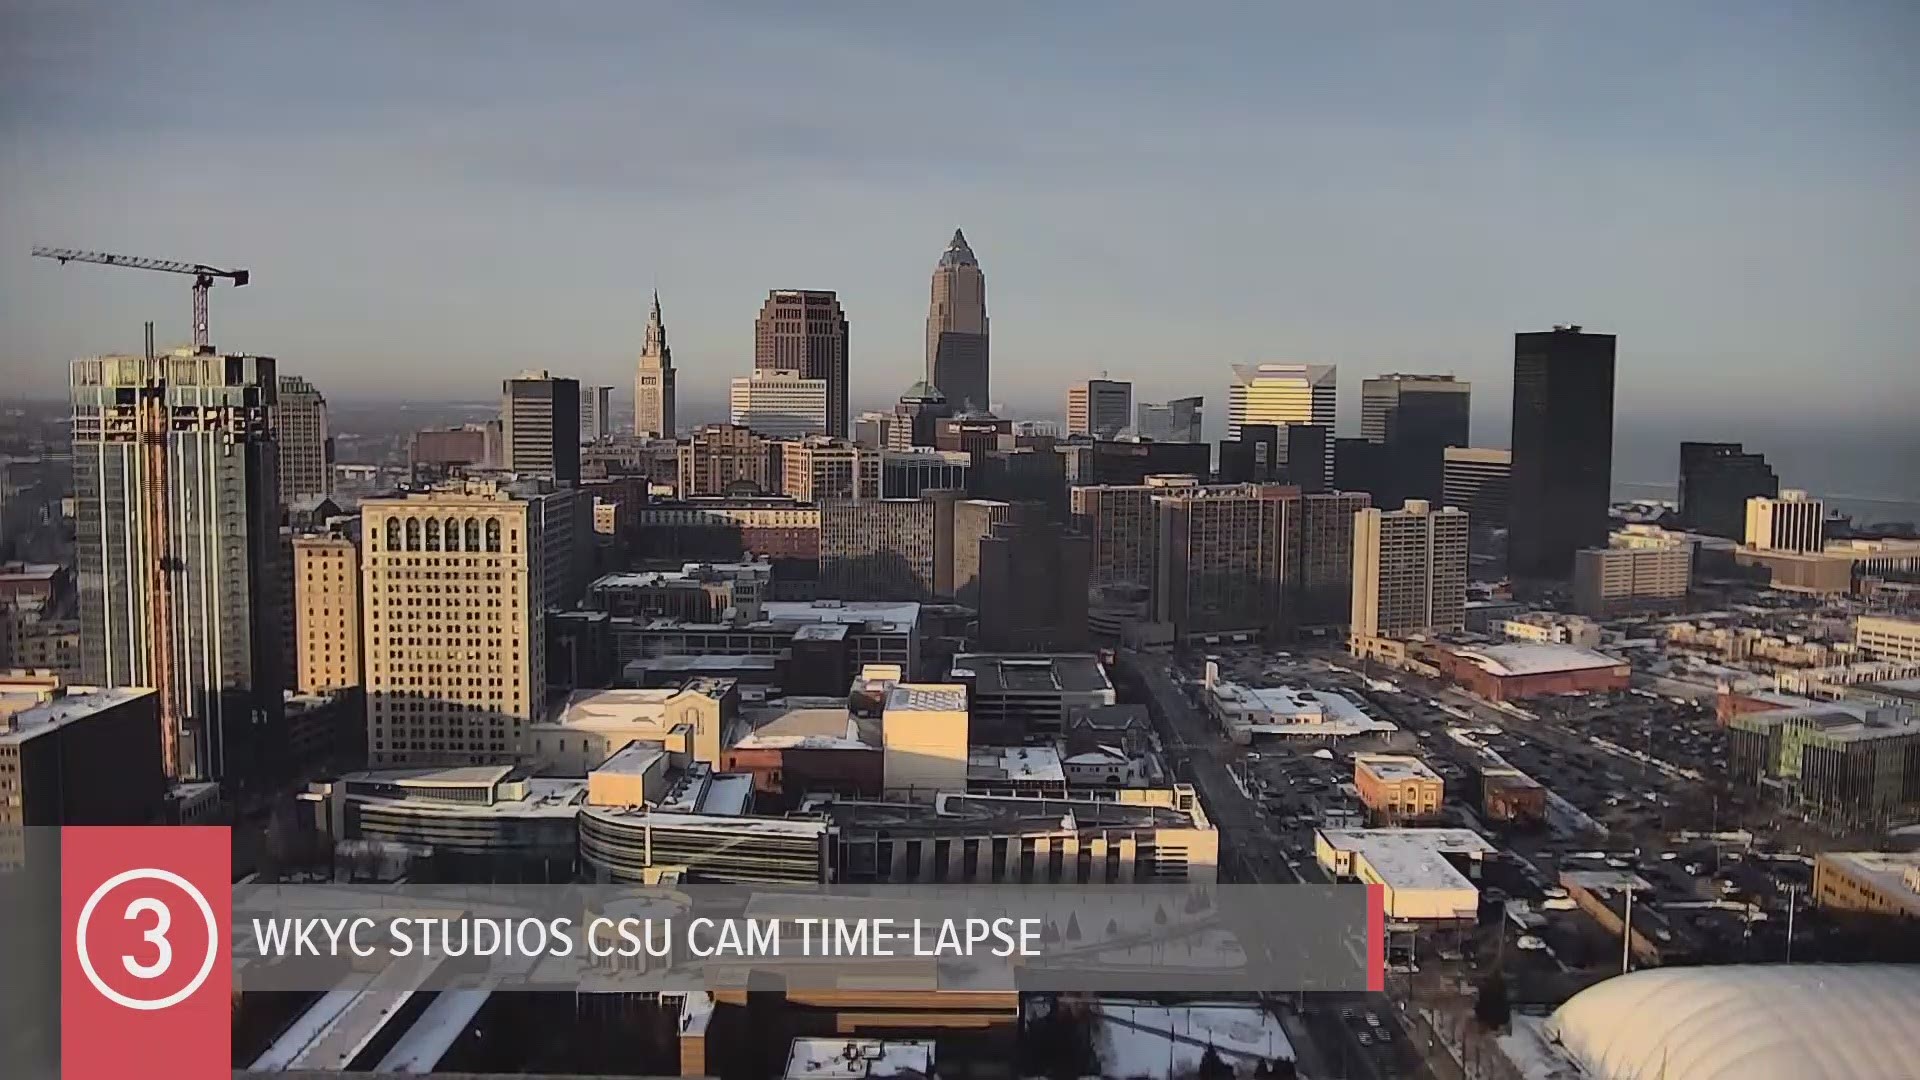 Here's your Wednesday weather time-lapse from the WKYC Studios CSU Cam. Enjoy! #3weather